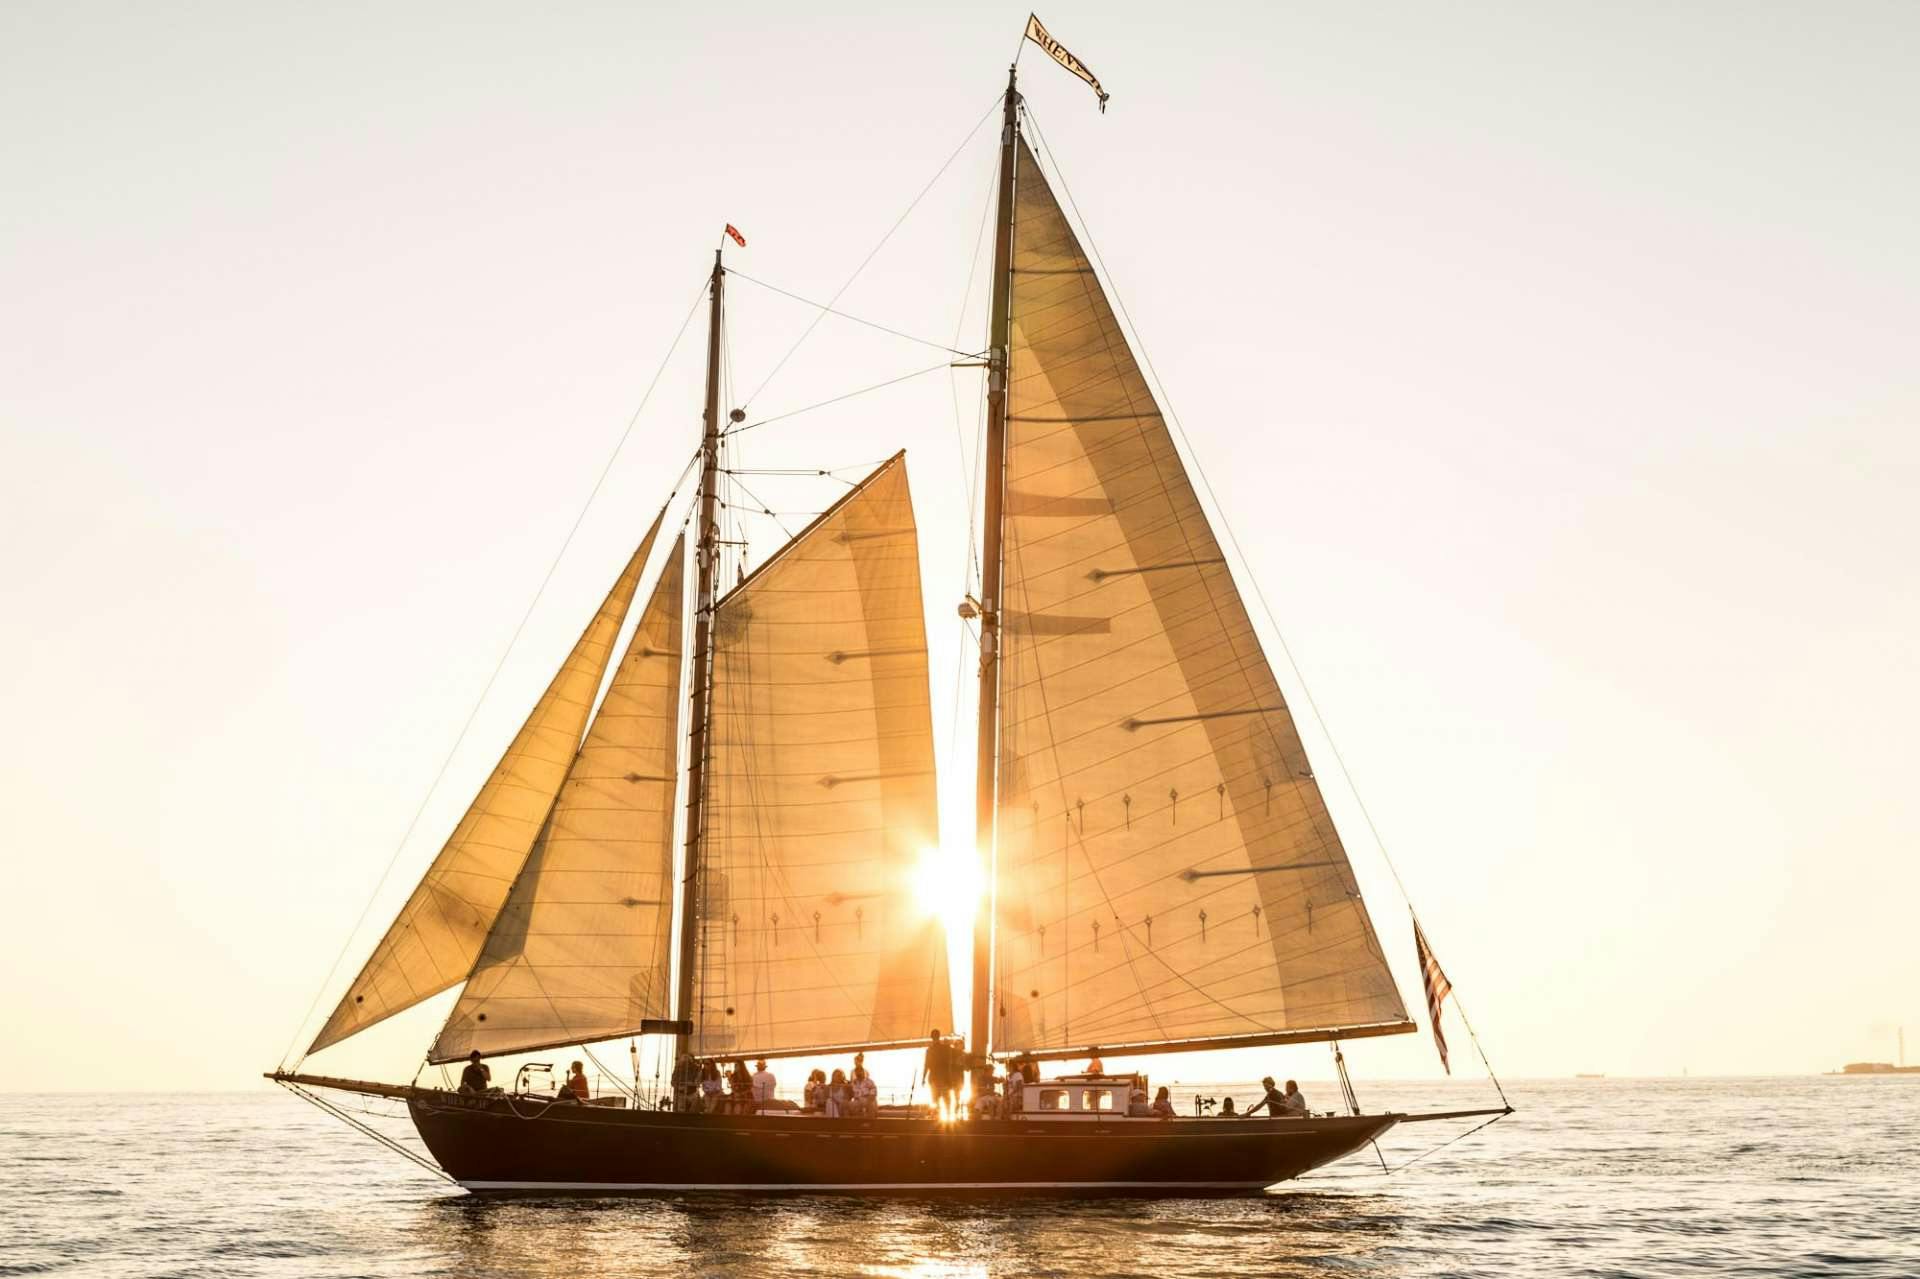 when and if - Sailboat Charter USA & Boat hire in Summer: USA - New England | Winter: USA - Florida East Coast 1